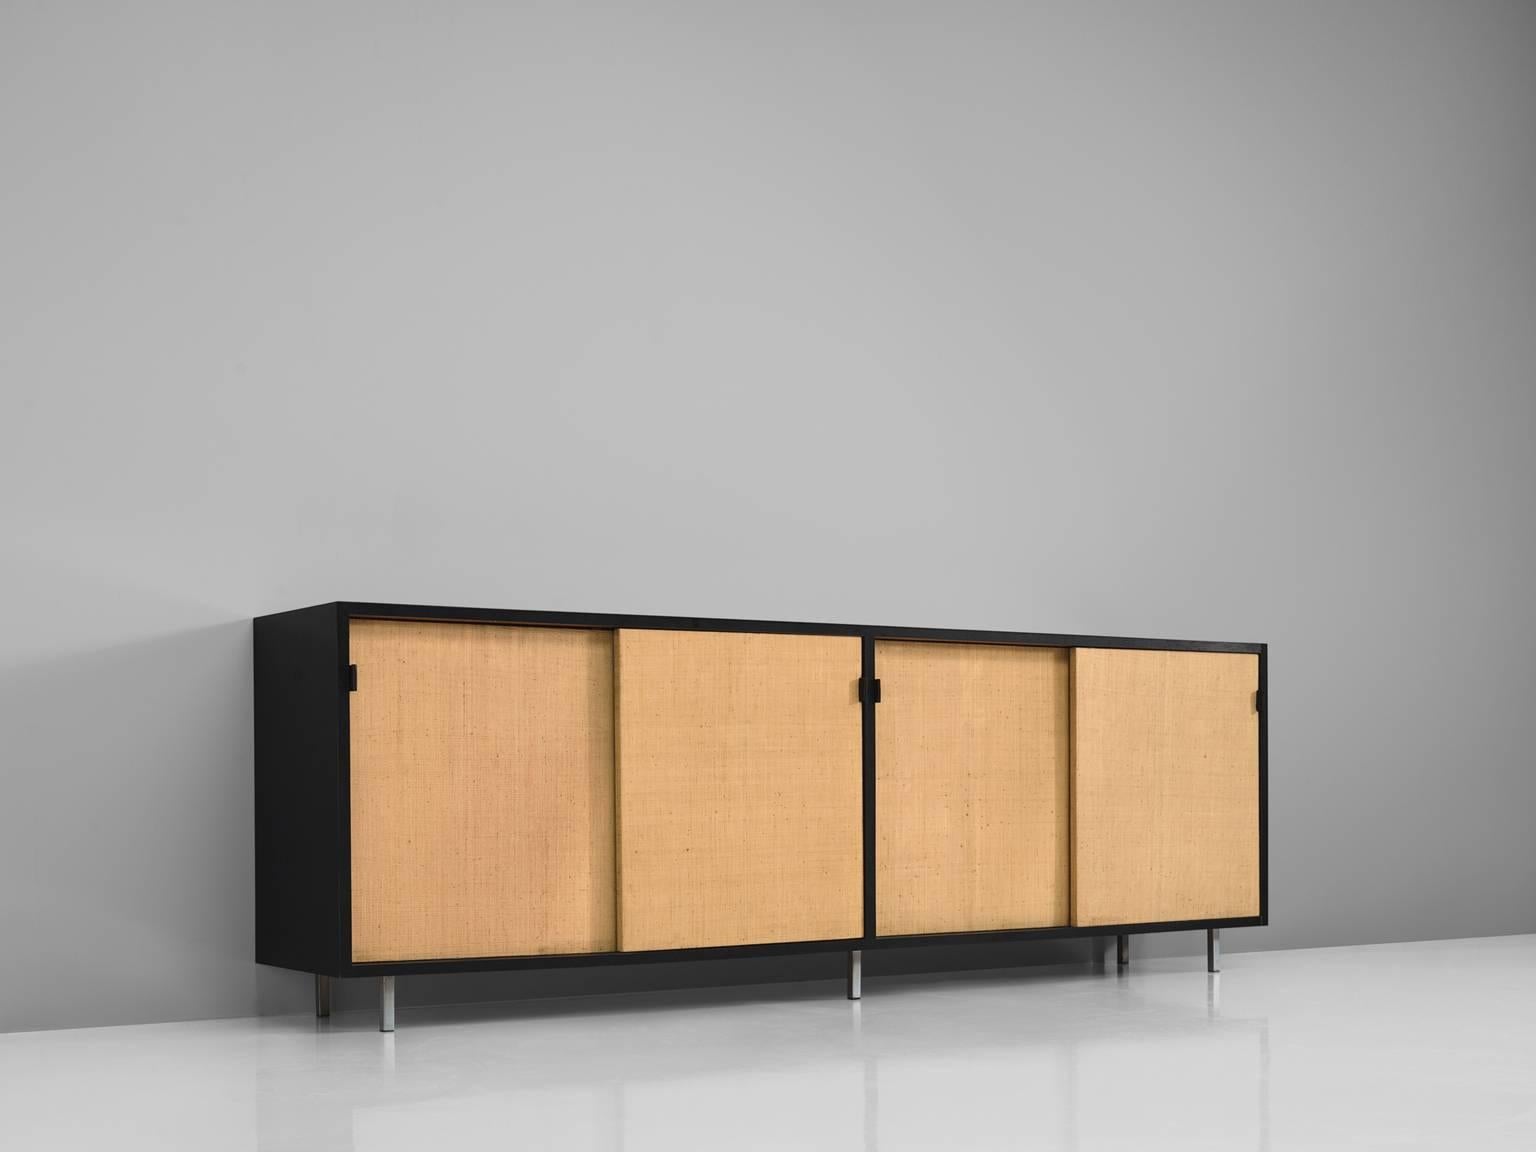 Florence Knoll for Knoll, cane, black ebonized wood, metal, cane, United States, 1961.

This sideboard is designed by Florence Knoll for Knoll International and was designed for the head office of a bank in Italy. The credenza is executed with